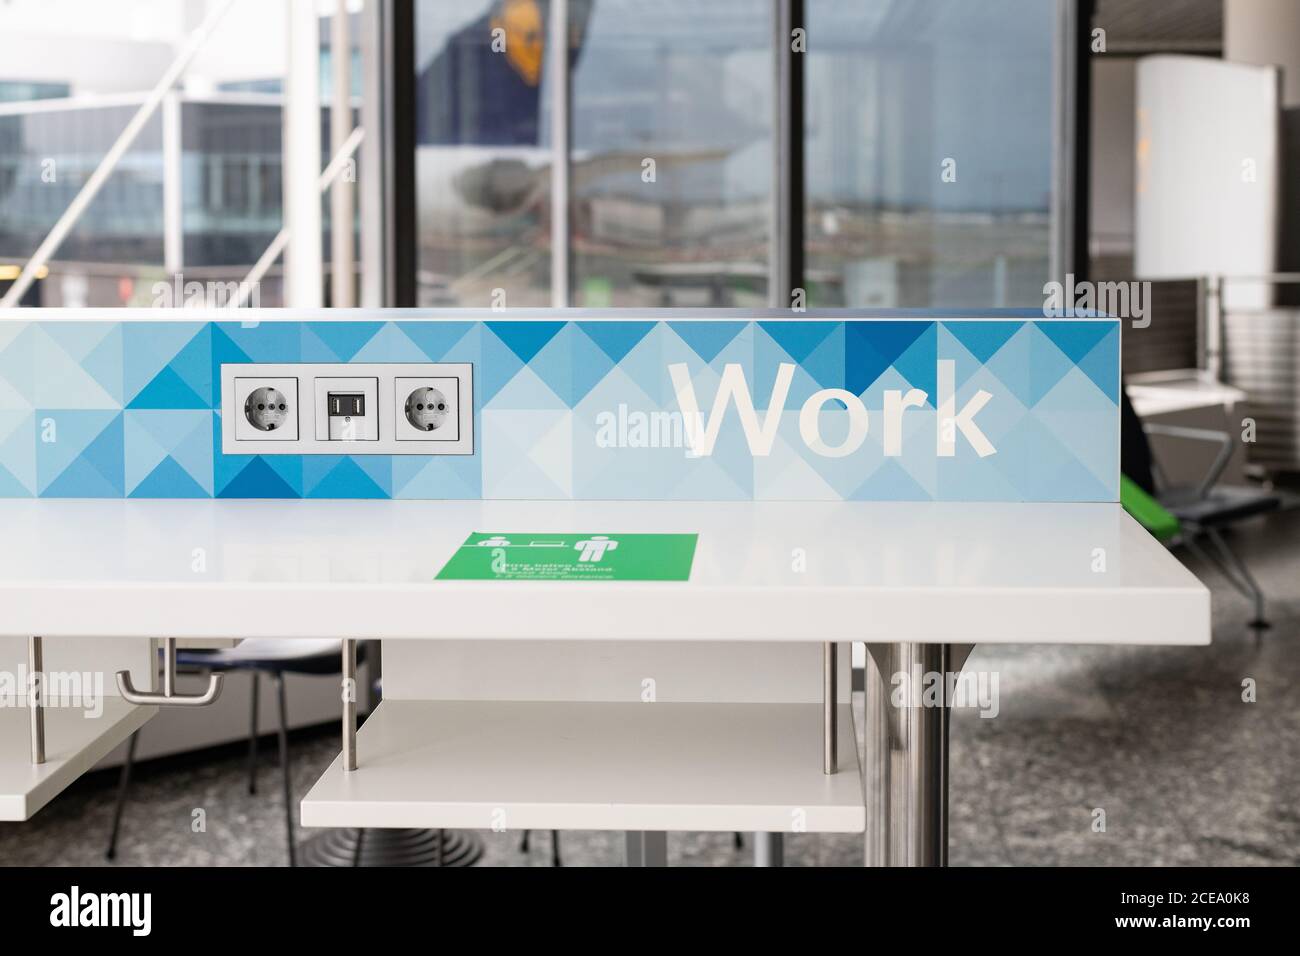 Work and connect workbench work space at Frankfurt airport with social distancing reminder sign during coronavirus pandemic, Germany Stock Photo